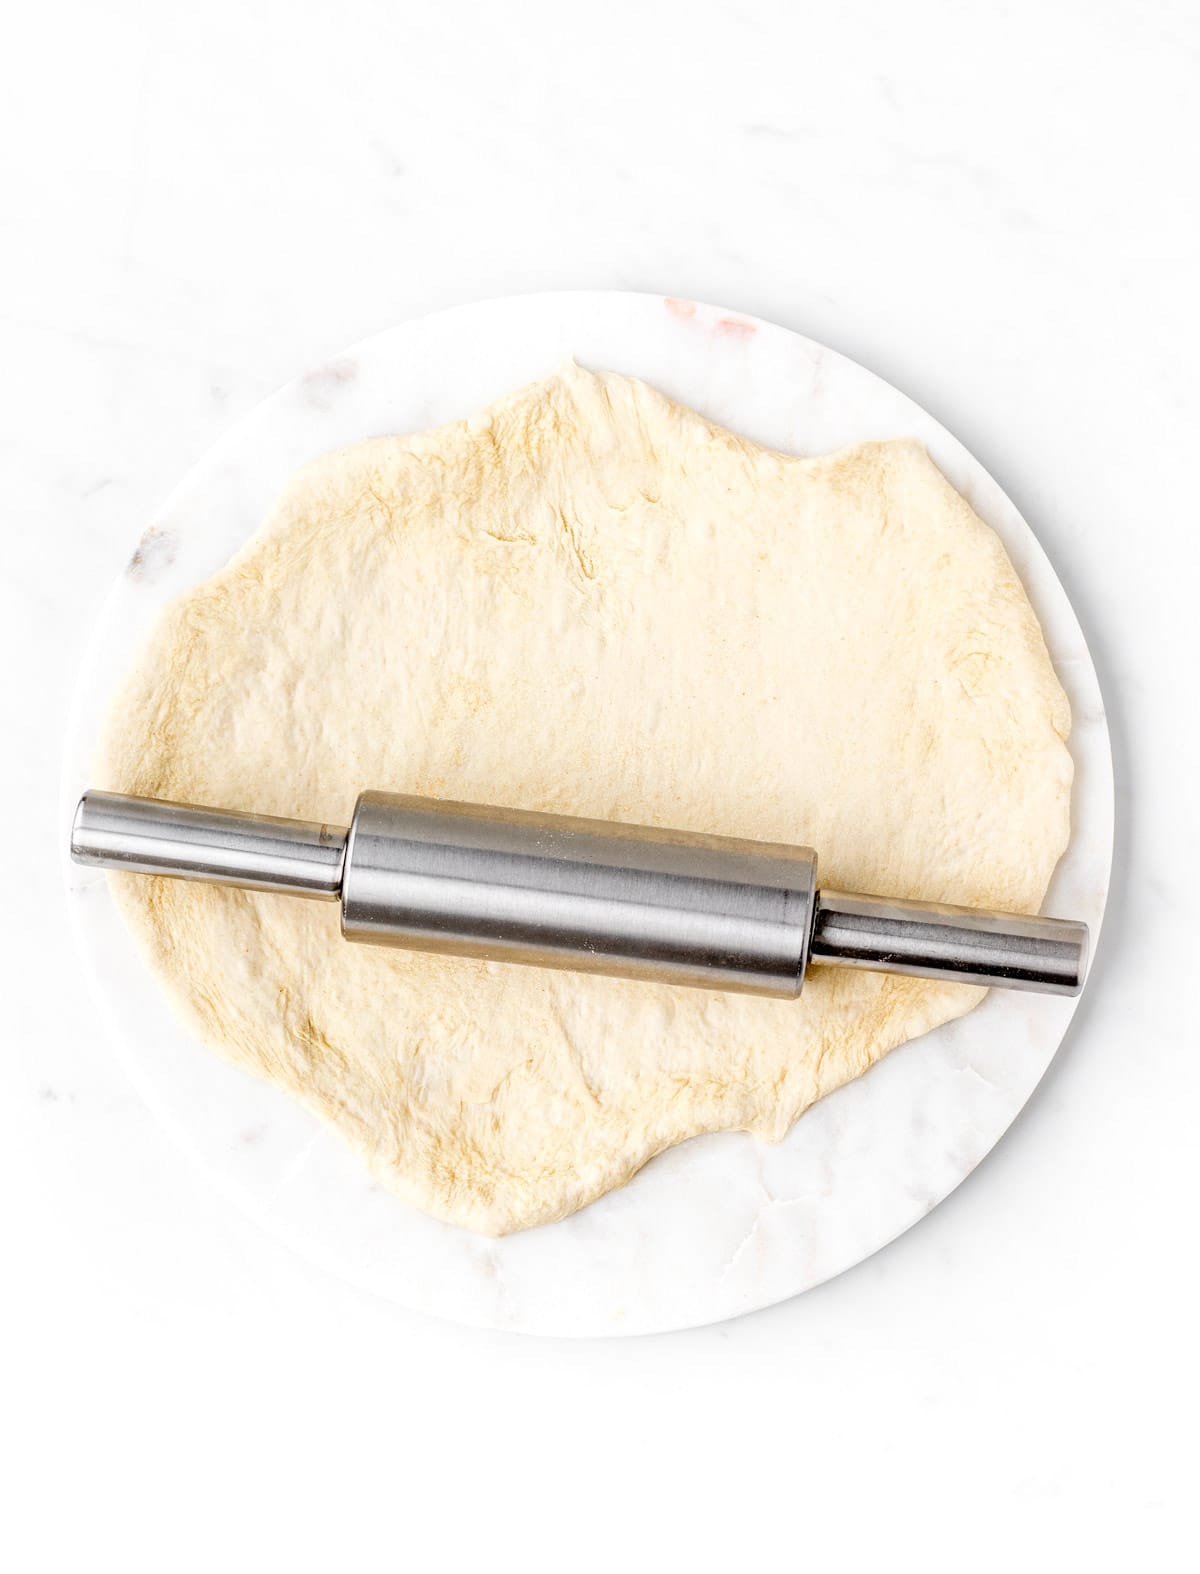 The pizza dough being rolled out and a plate with a rolling pin.